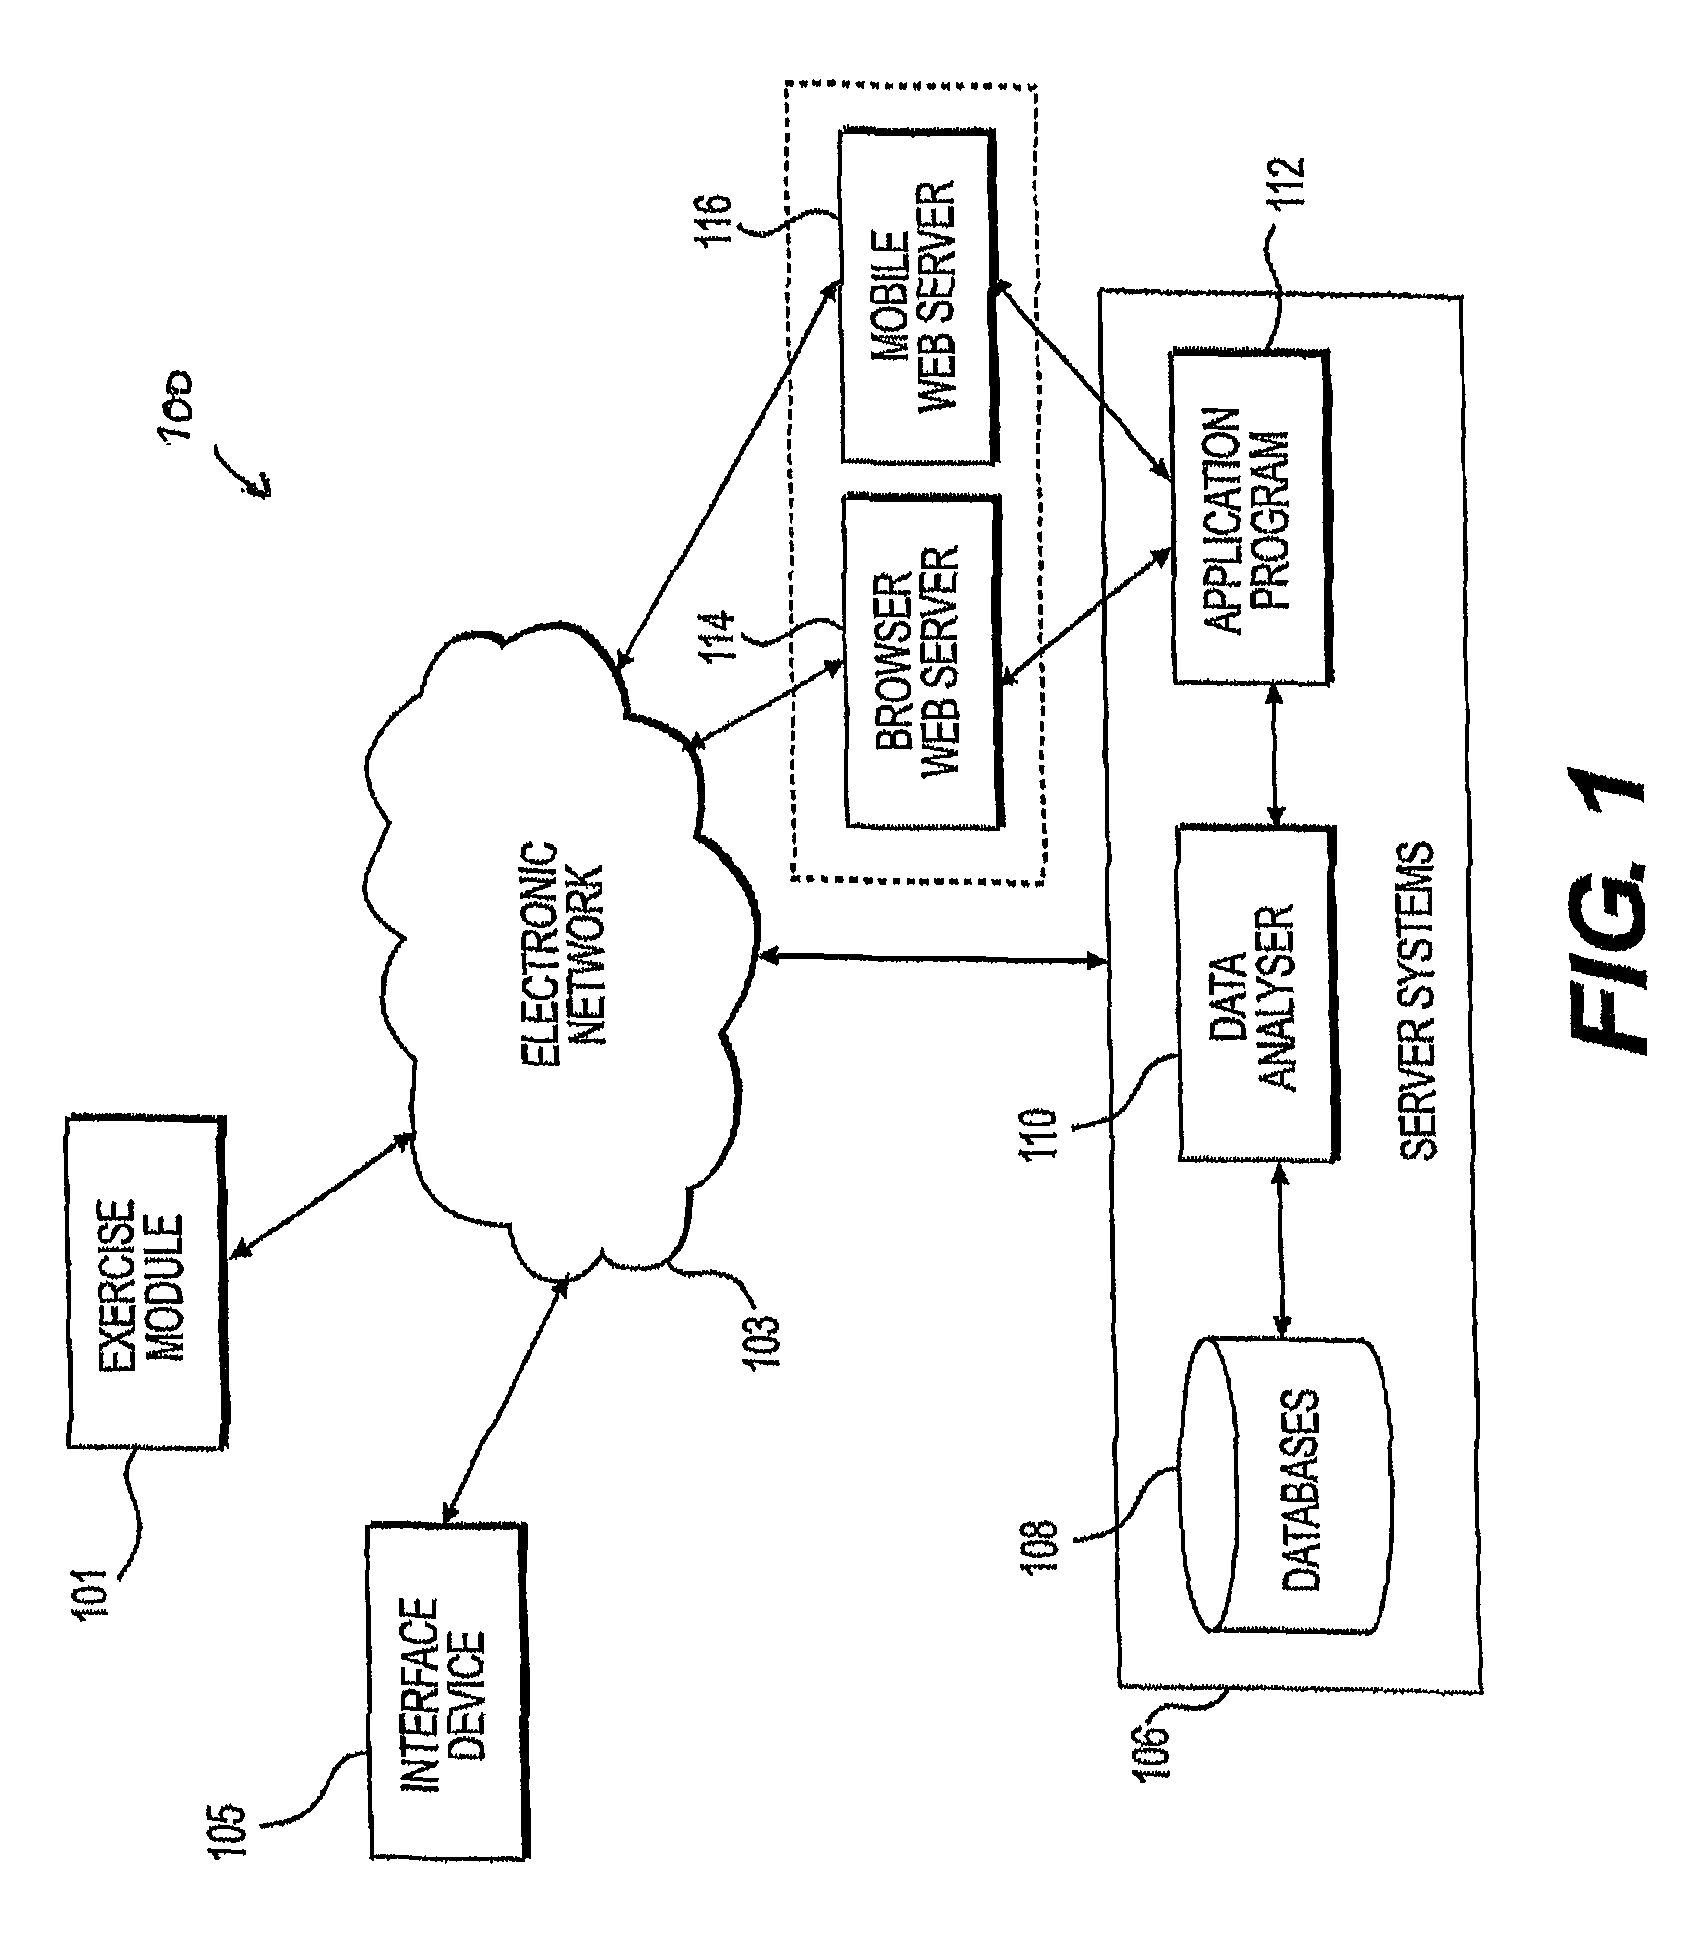 Exercise tracking and analysis systems and related methods of use